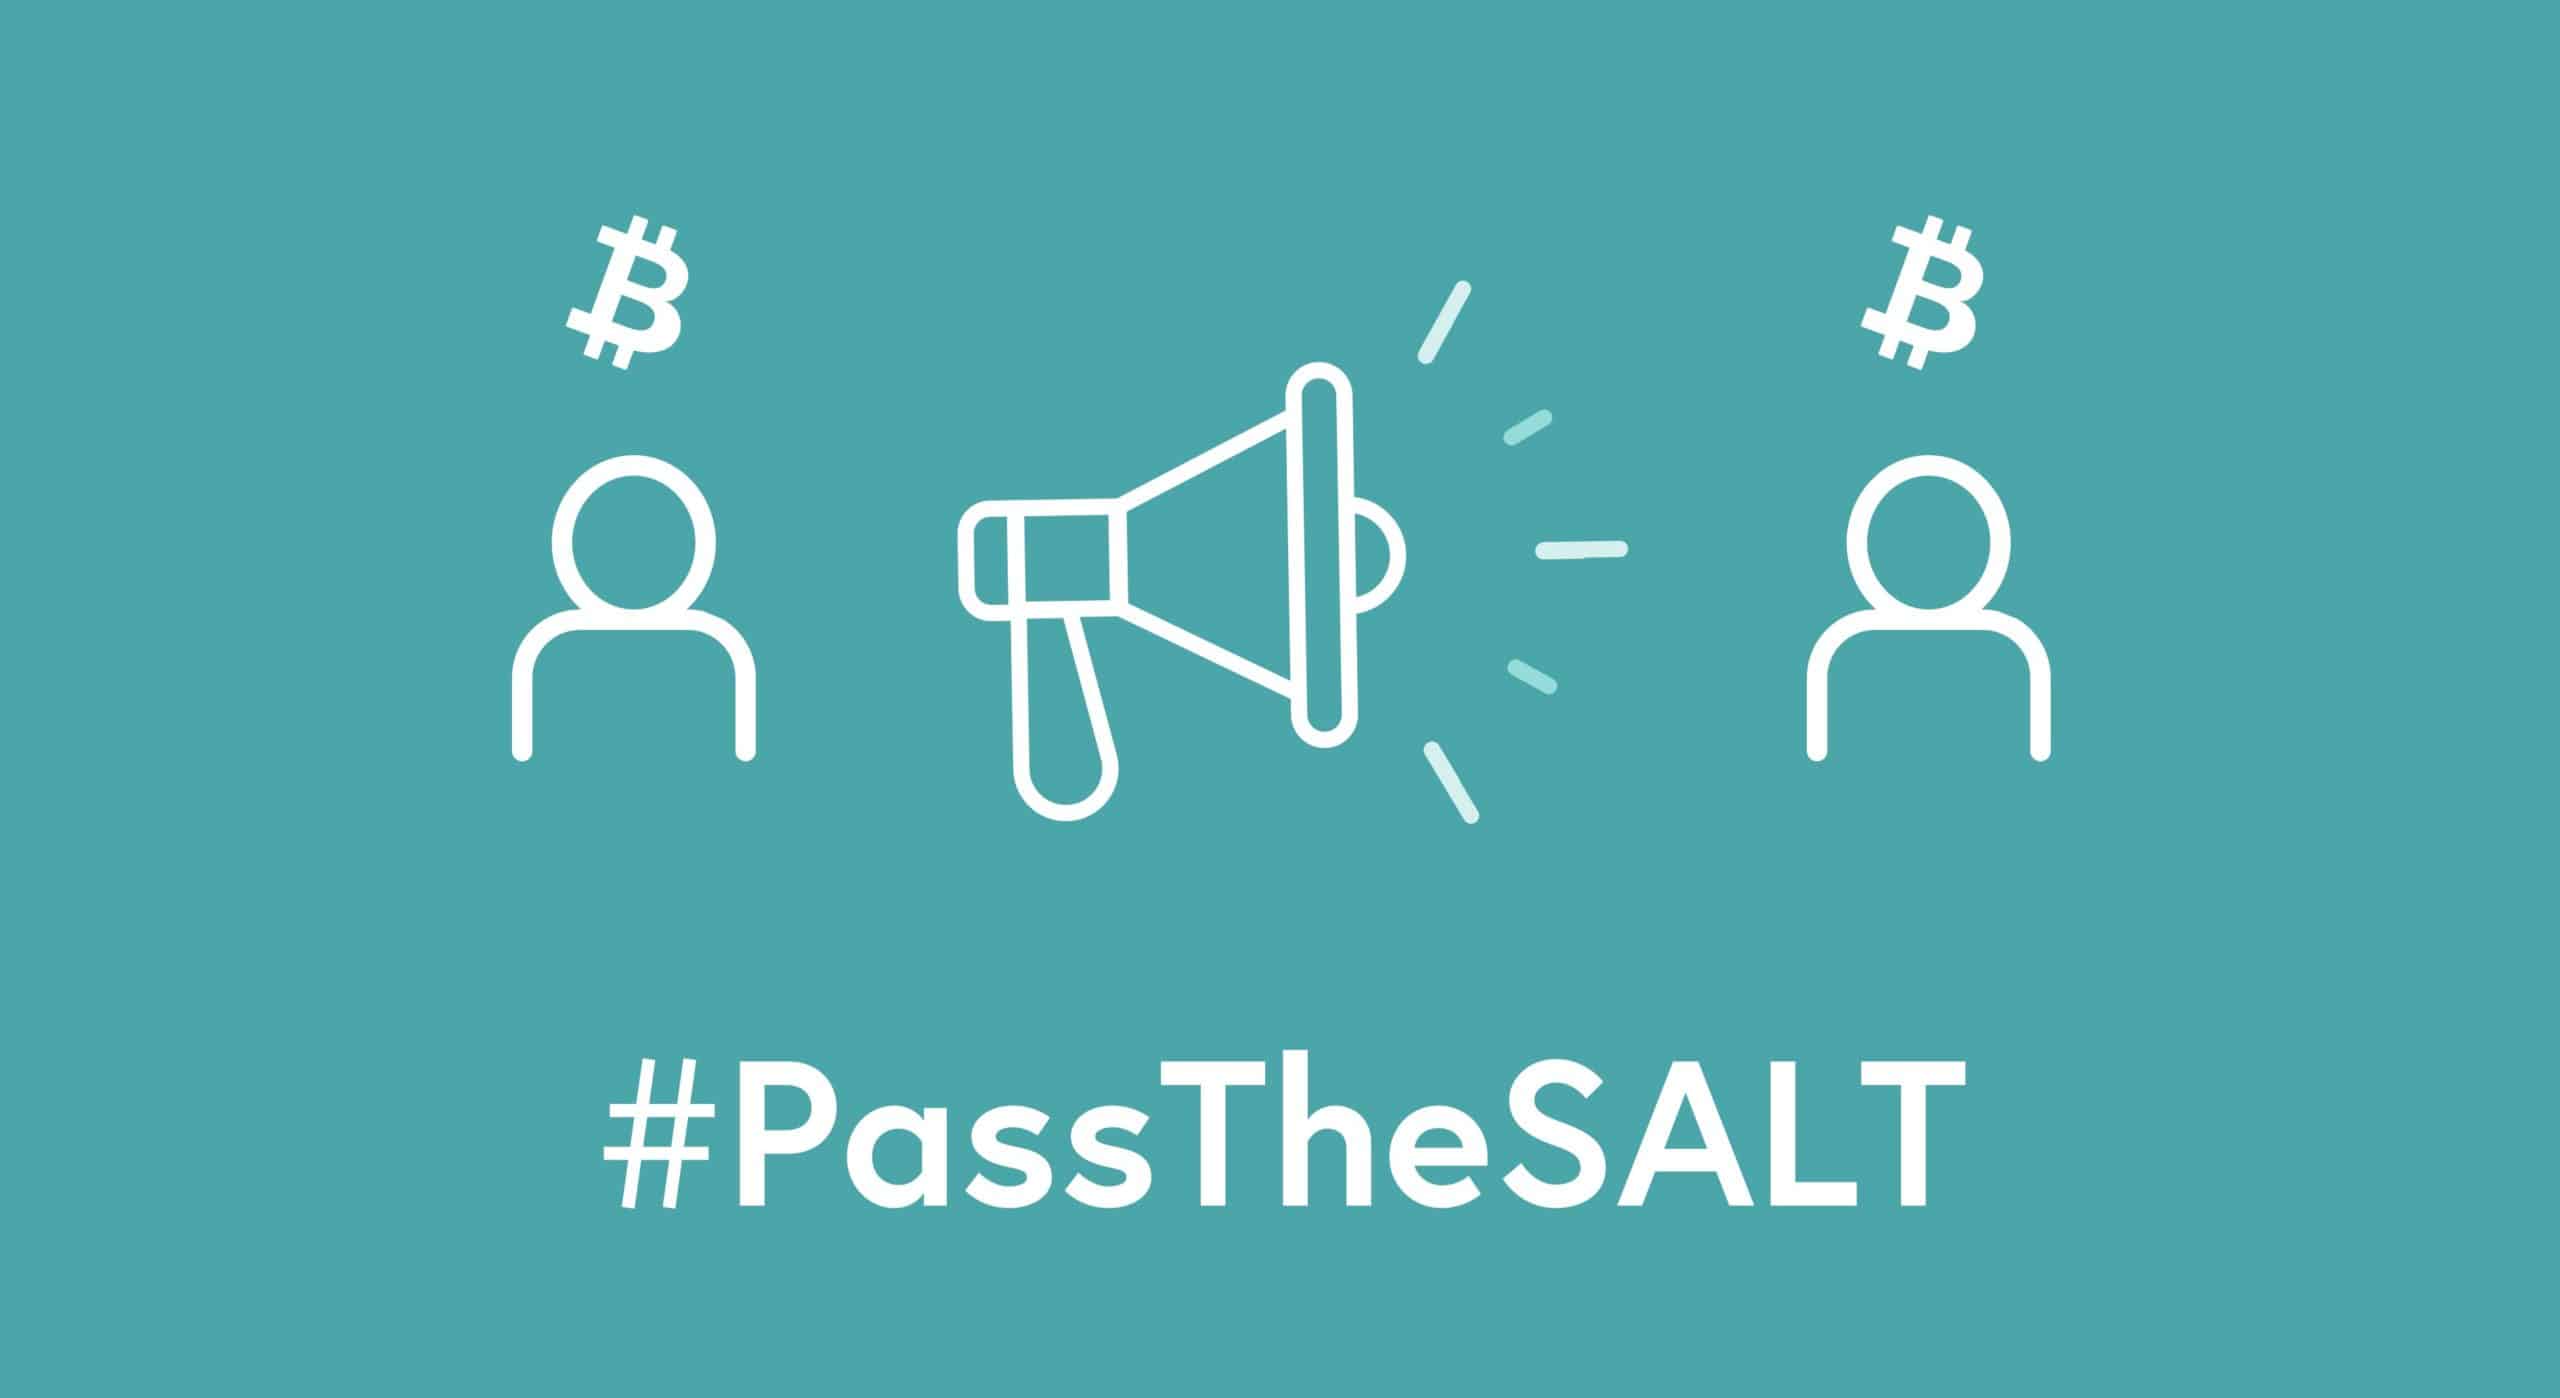 Crypto HODLer referring friend to the SALT platform and both get bitcoin